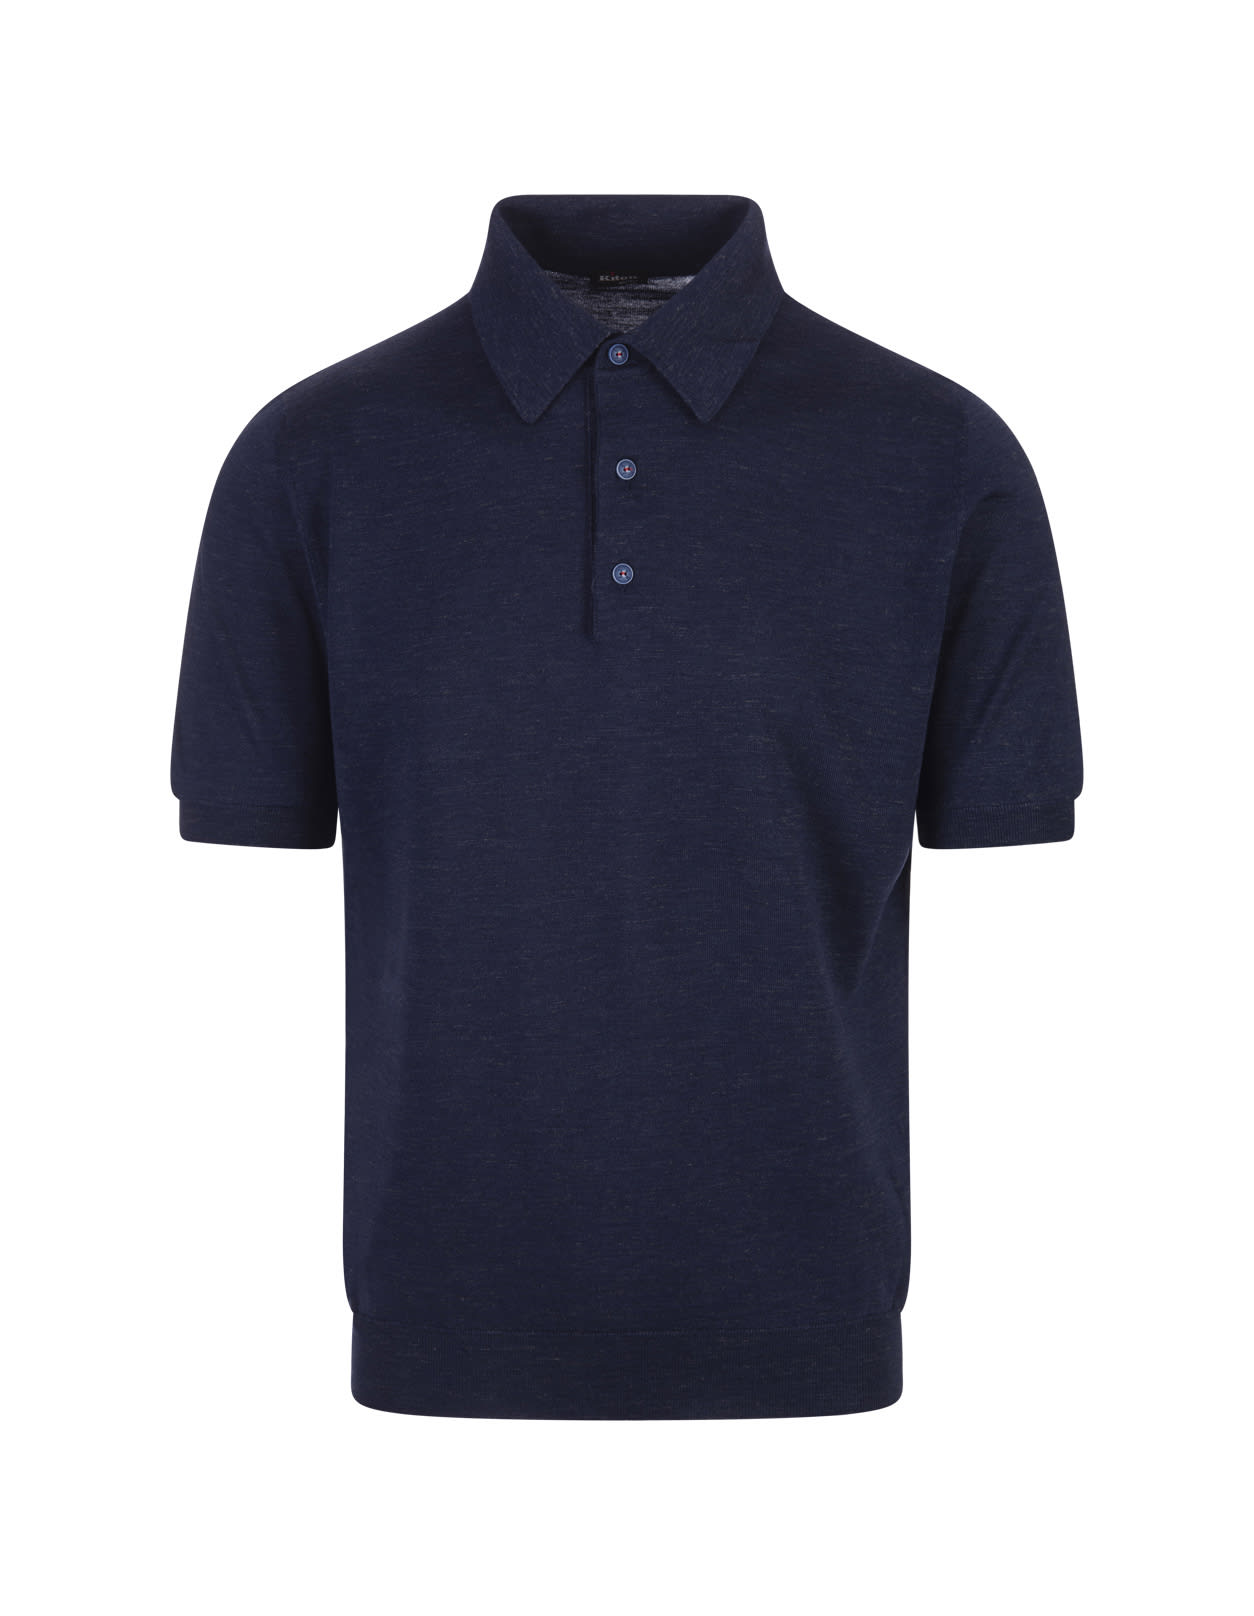 Navy Blue Knitted Short-sleeved Polo Shirt